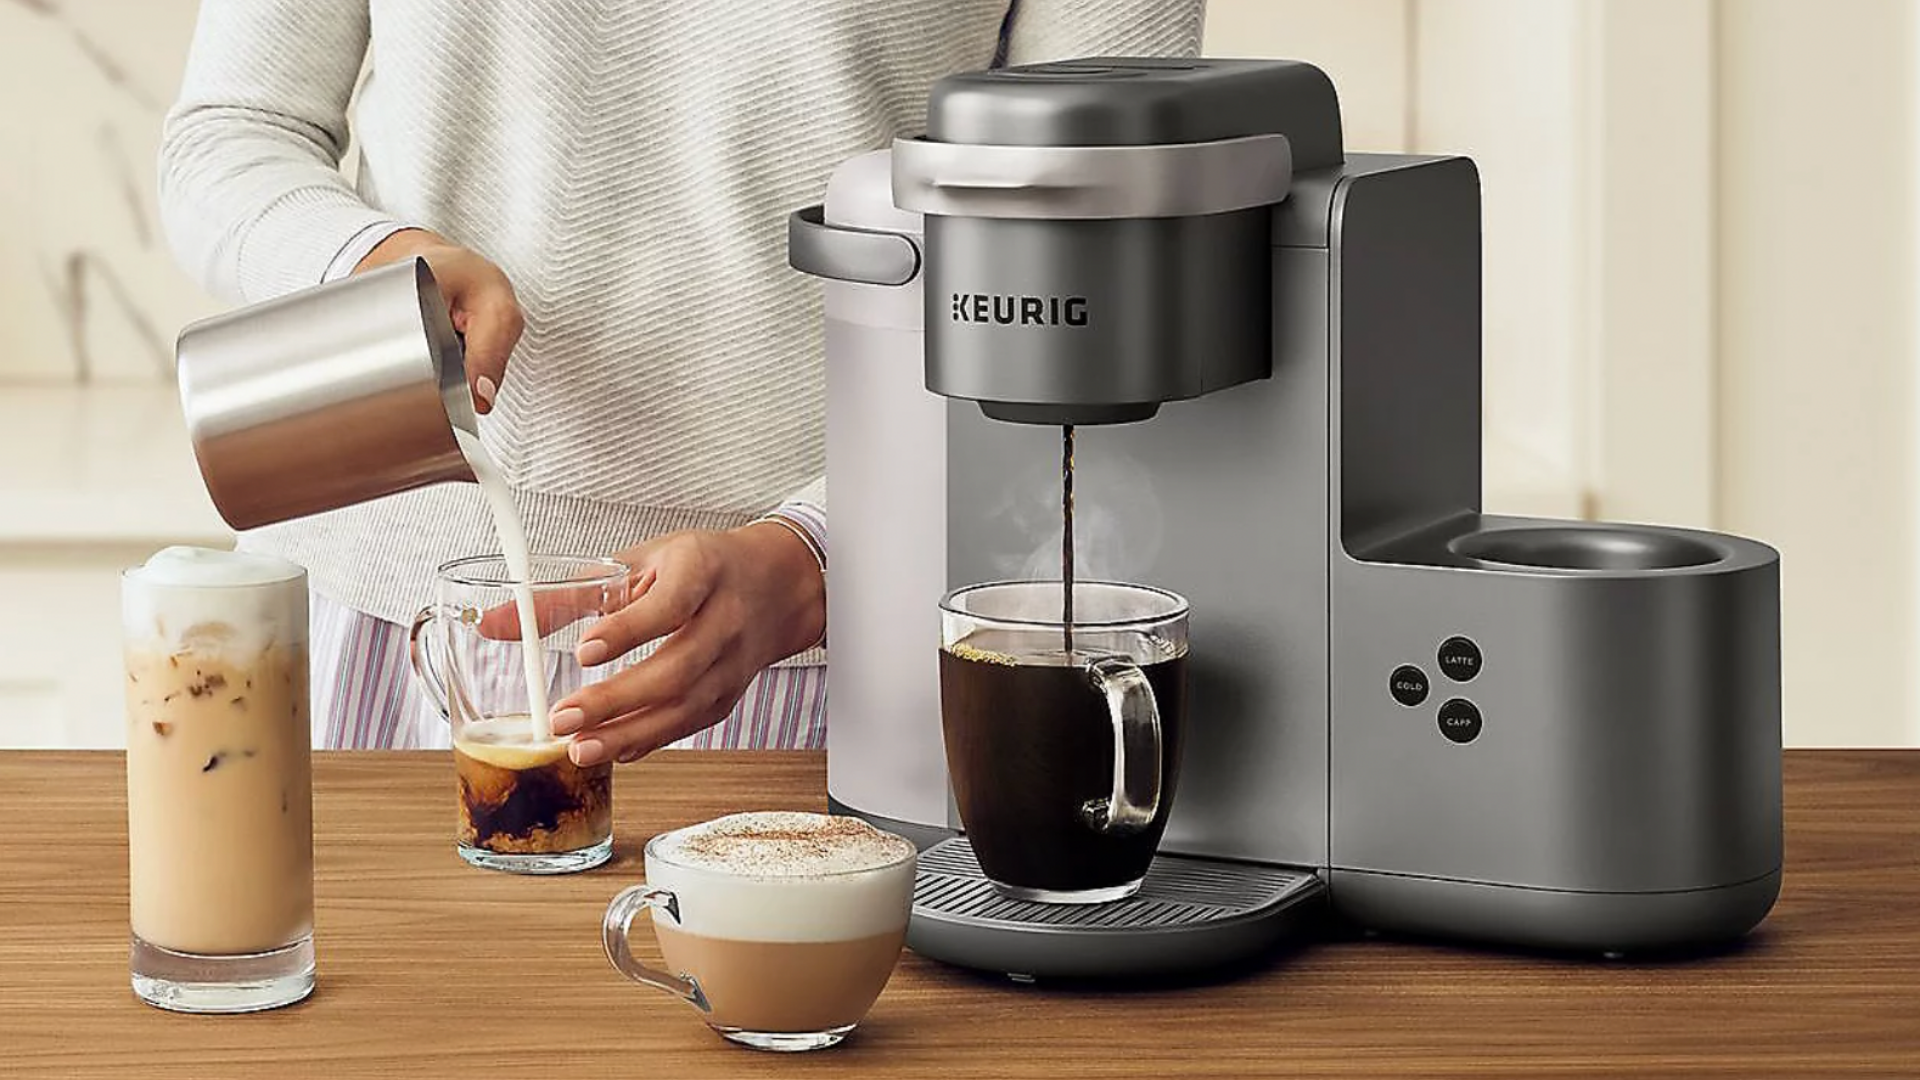 A person pours a cup of coffee from a Keurig machine.